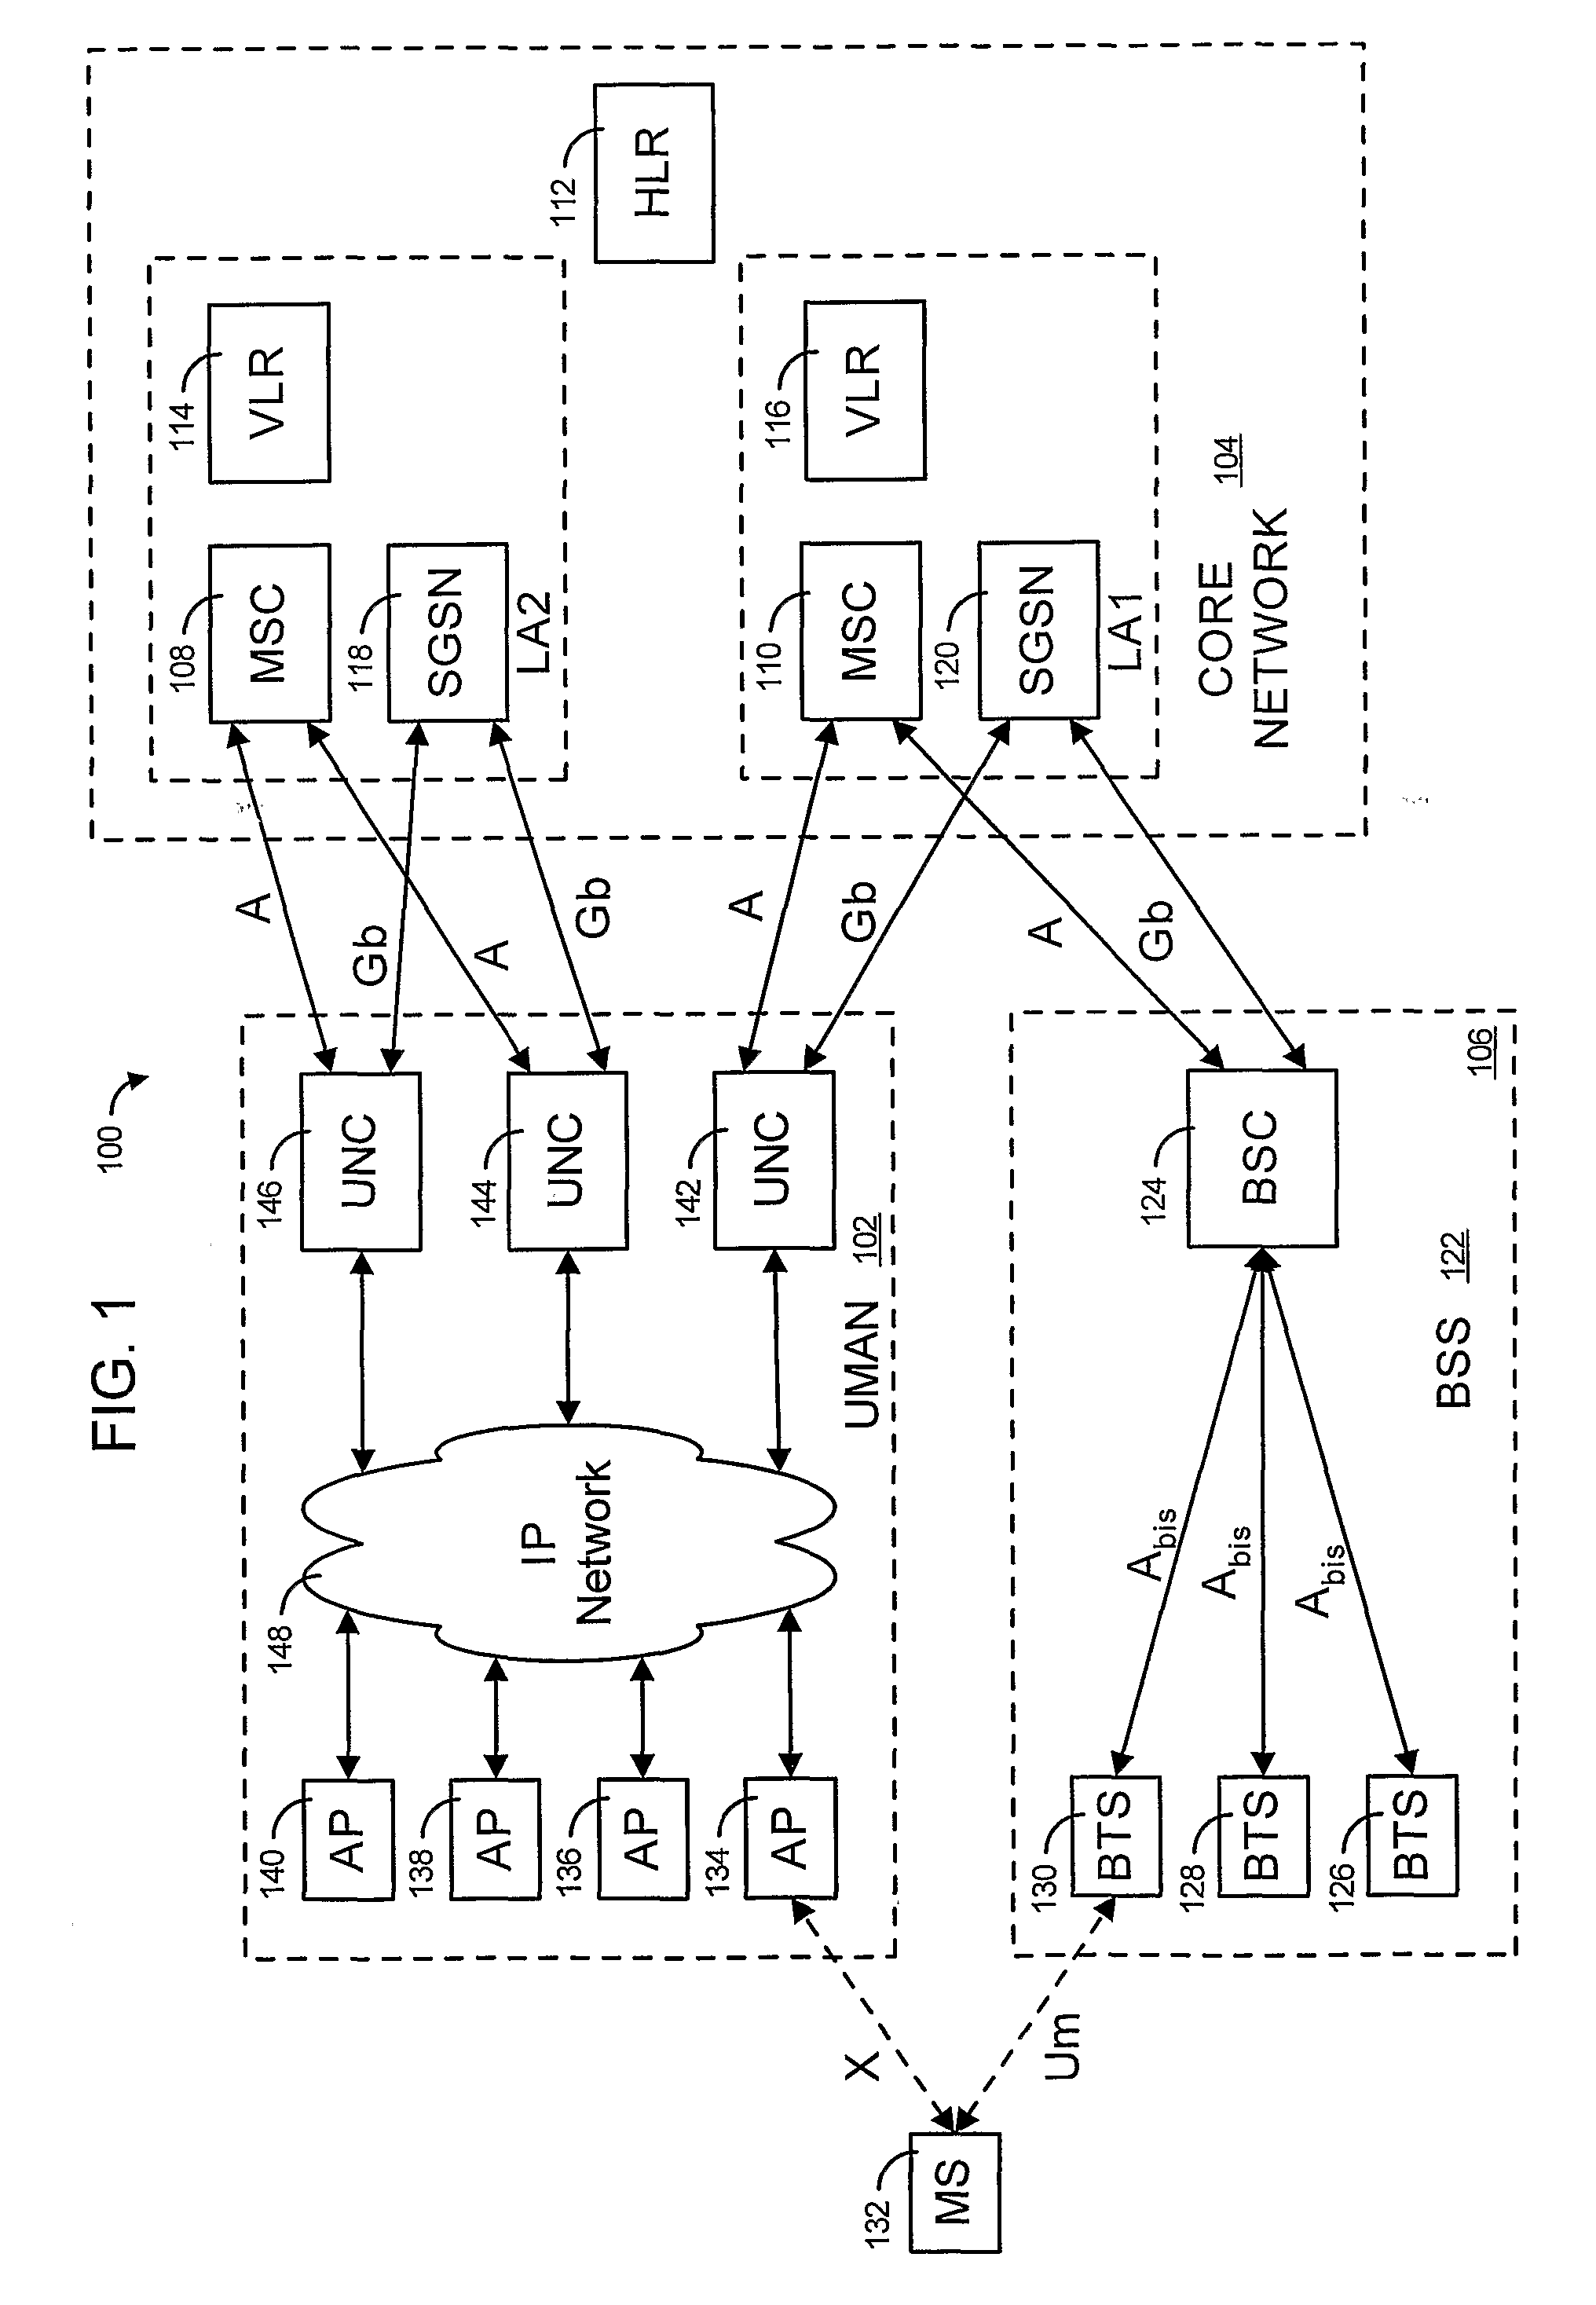 Method and System to Assign Mobile Stations to an Unlicensed Mobile Access Network Controller in an Unlicensed Radio Access Network